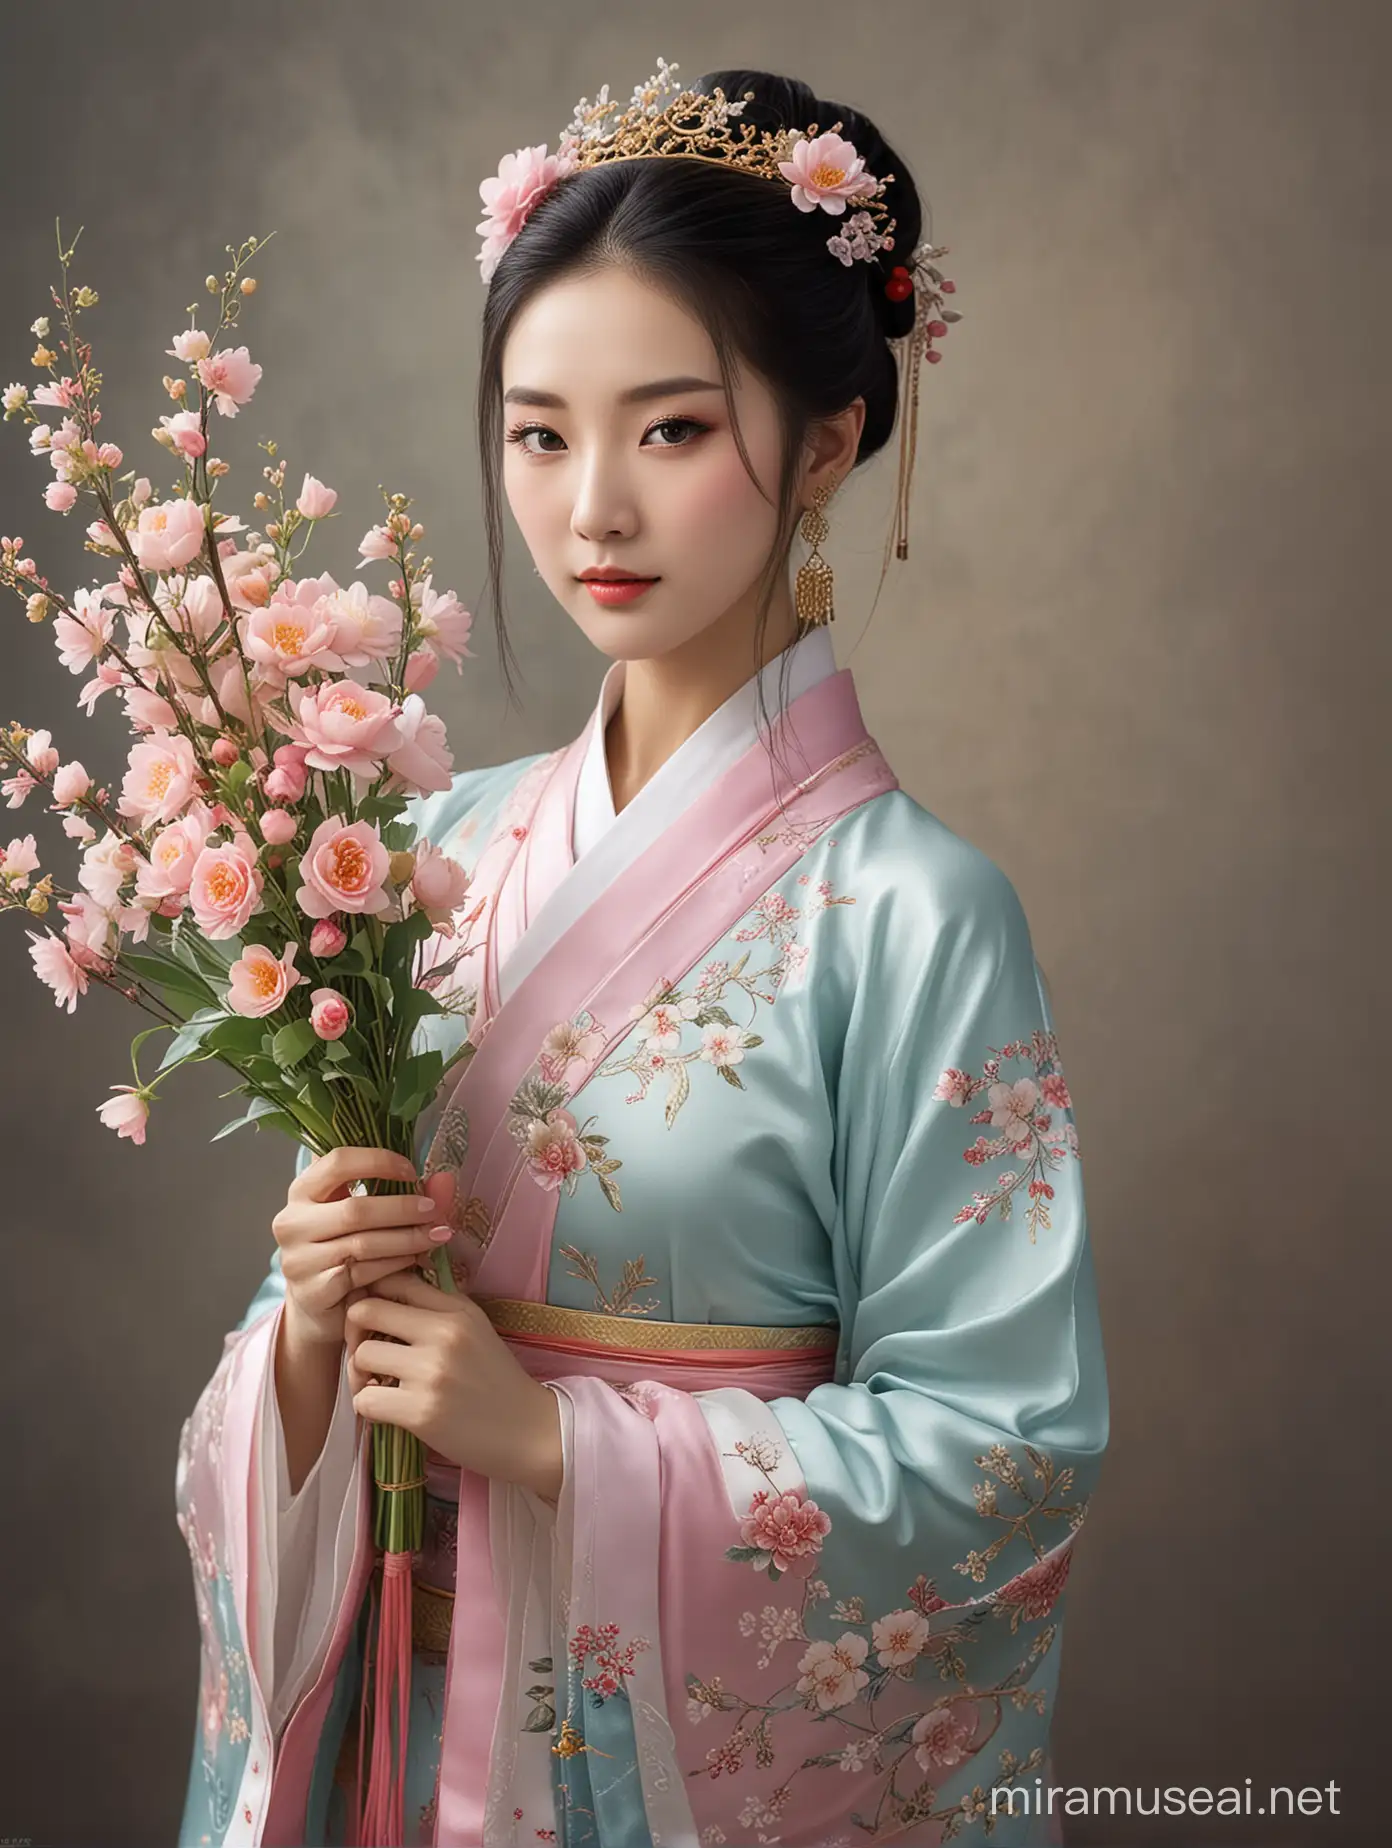 Elegant Chinese Princess Holding Flower Bouquet in Palace Courtyard